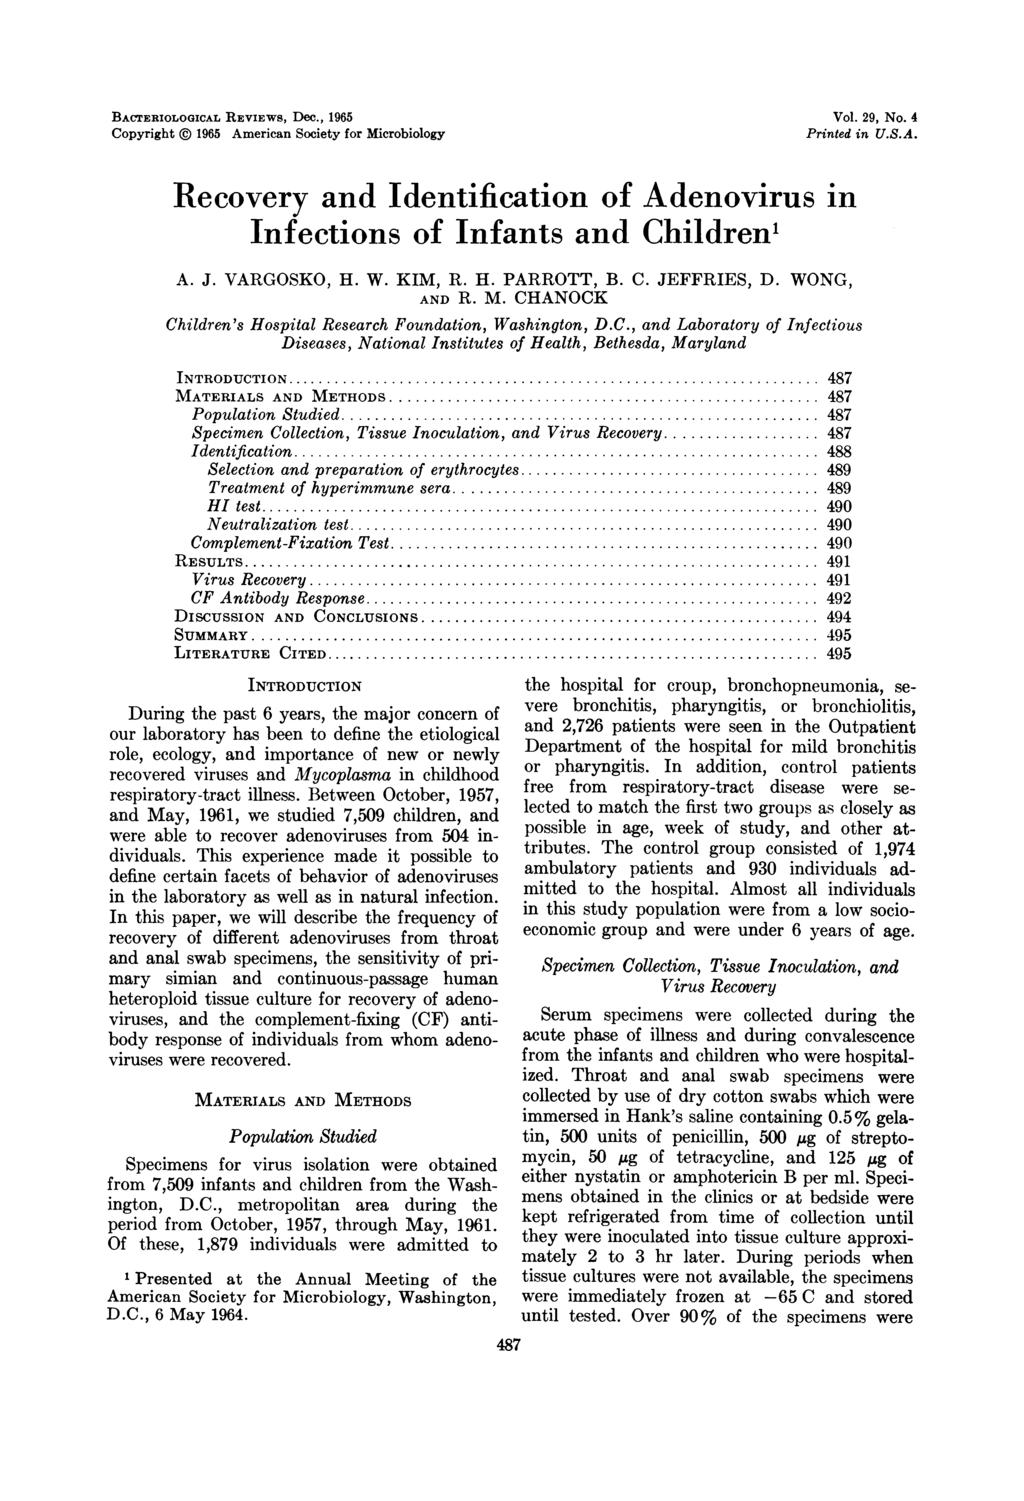 BACTERIOLOGICAL REVIEWS, Dec., 1965 Copyright 1965 American Society for Microbiology Vol. 29, No. 4 Printed in U.S.A. Recovery and Identification of Adenovirus in Infections of Infants and Children' A.